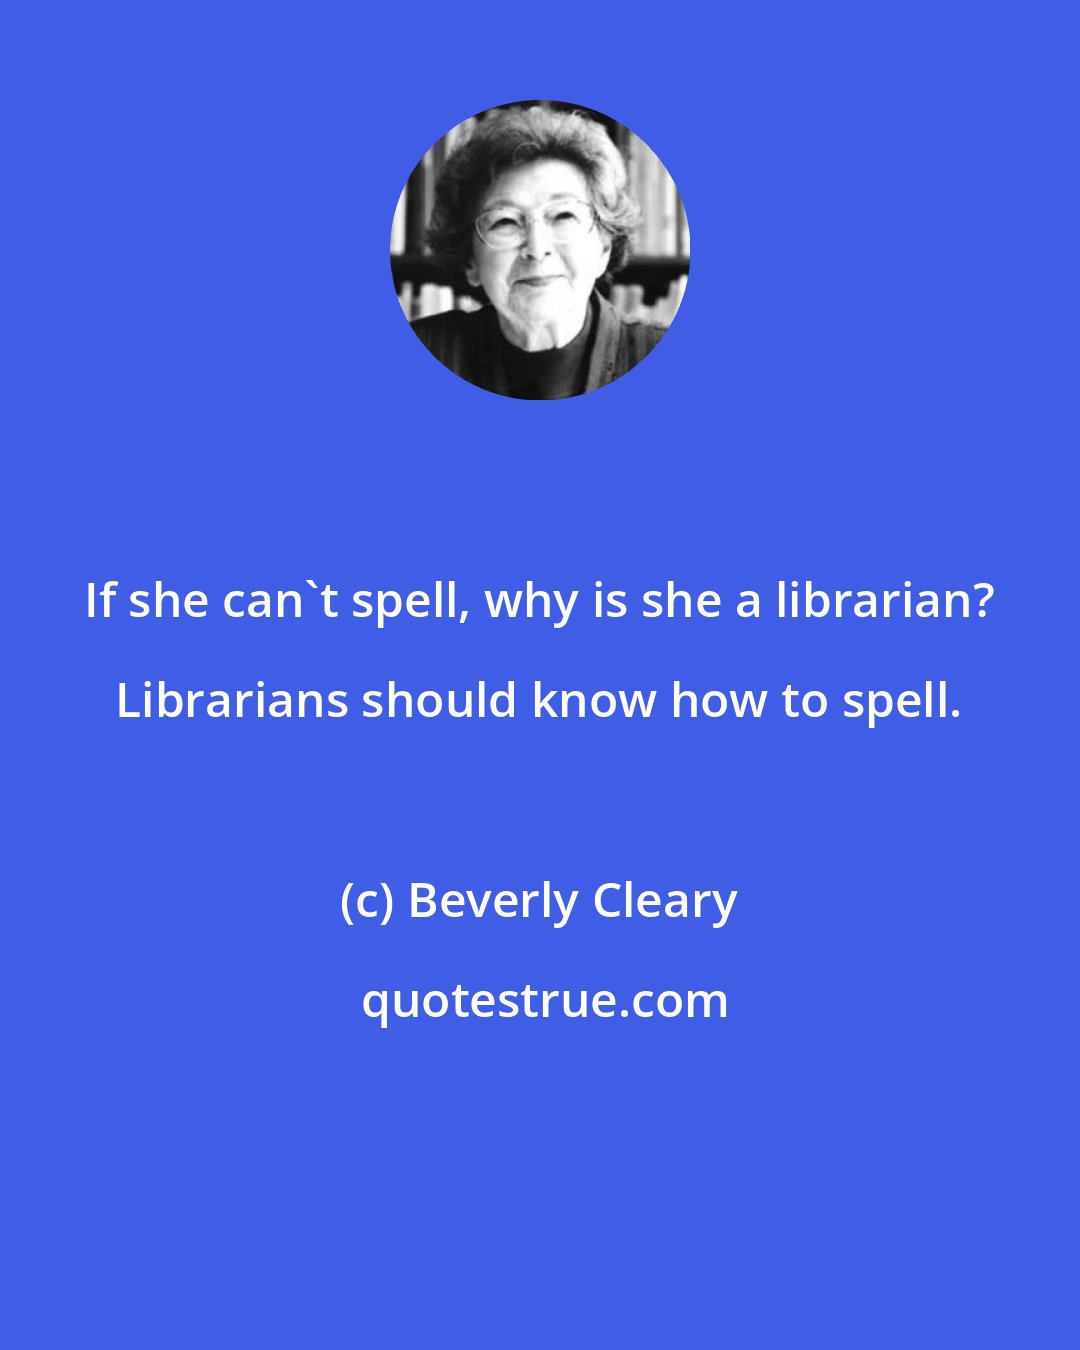 Beverly Cleary: If she can't spell, why is she a librarian? Librarians should know how to spell.